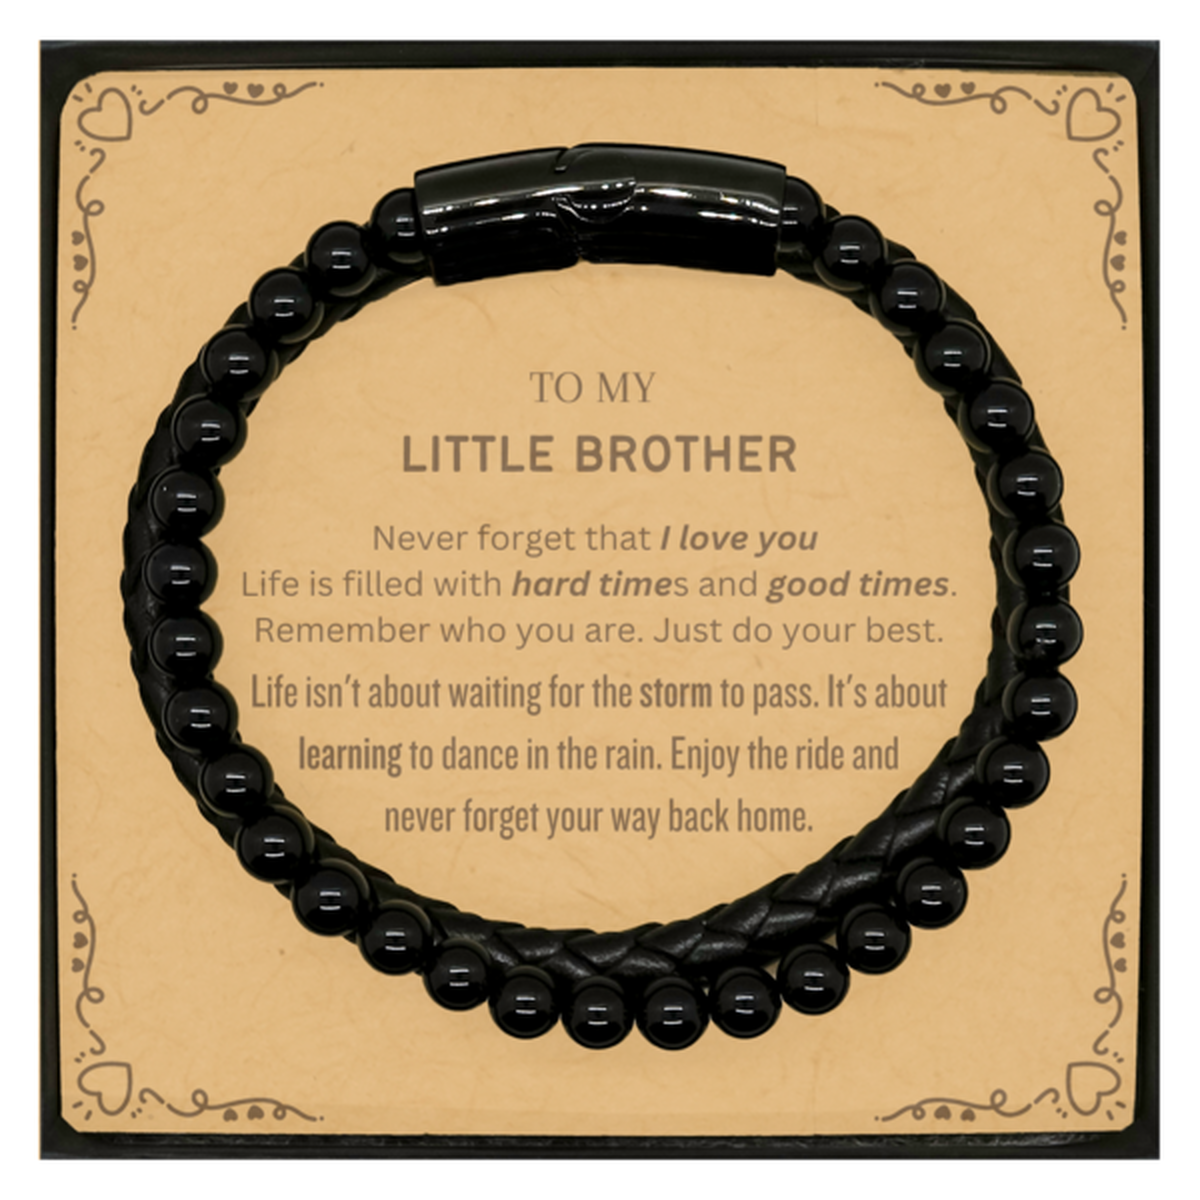 Christmas Little Brother Stone Leather Bracelets Gifts, To My Little Brother Birthday Thank You Gifts For Little Brother, Graduation Unique Gifts For Little Brother To My Little Brother Never forget that I love you life is filled with hard times and good